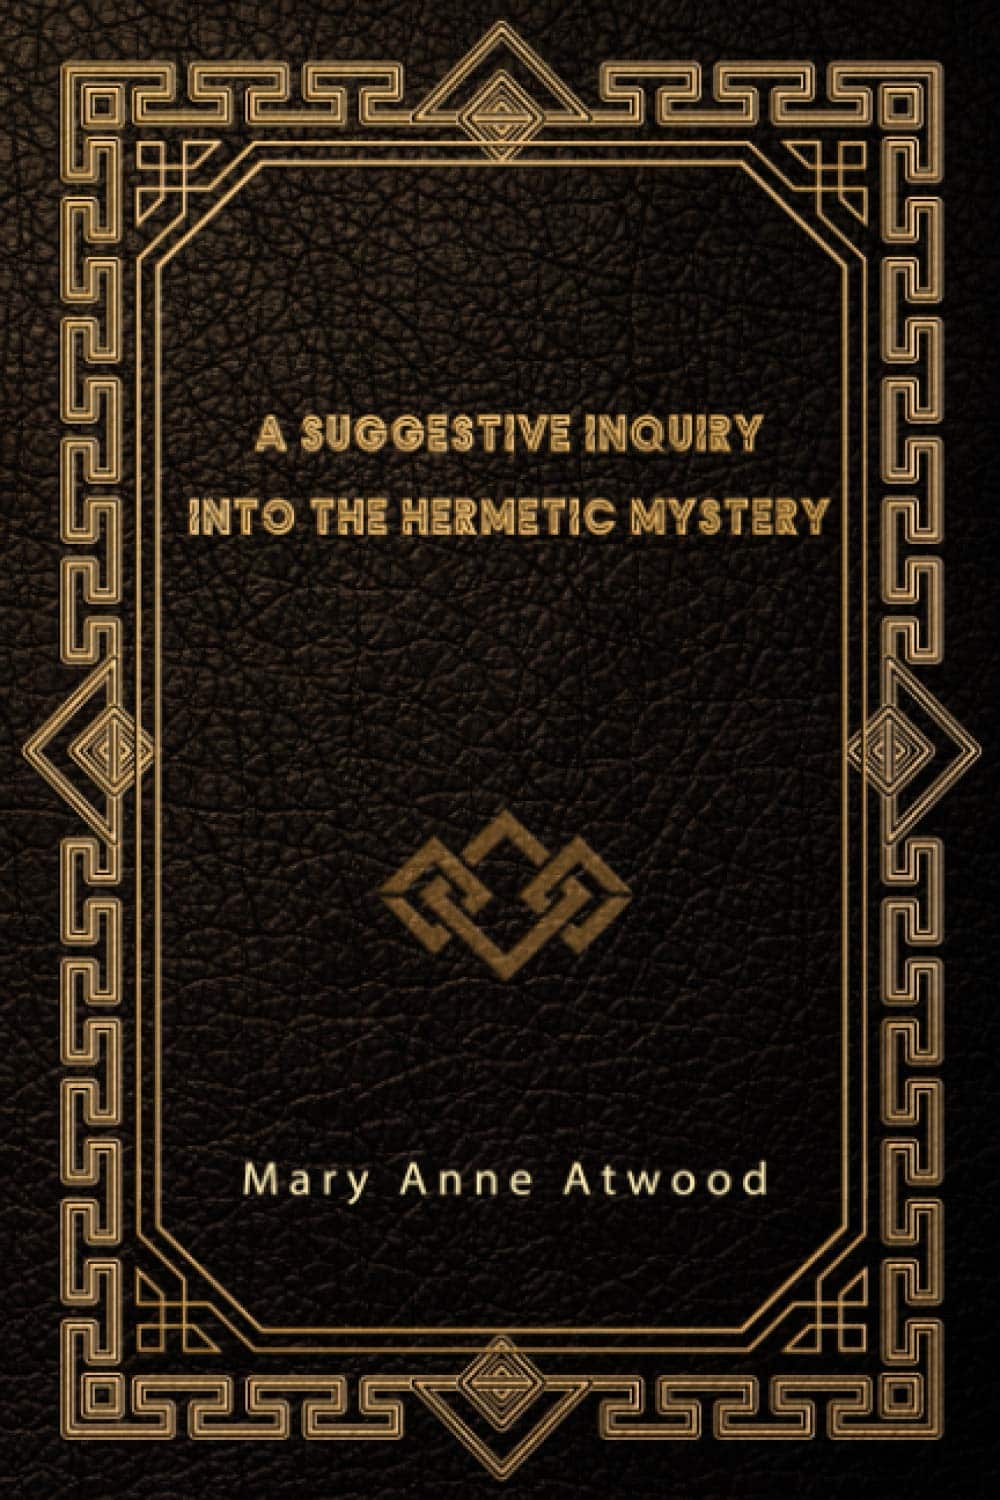 A Suggestive Inquiry into the Hermetic  
by Mary Anne Atwood